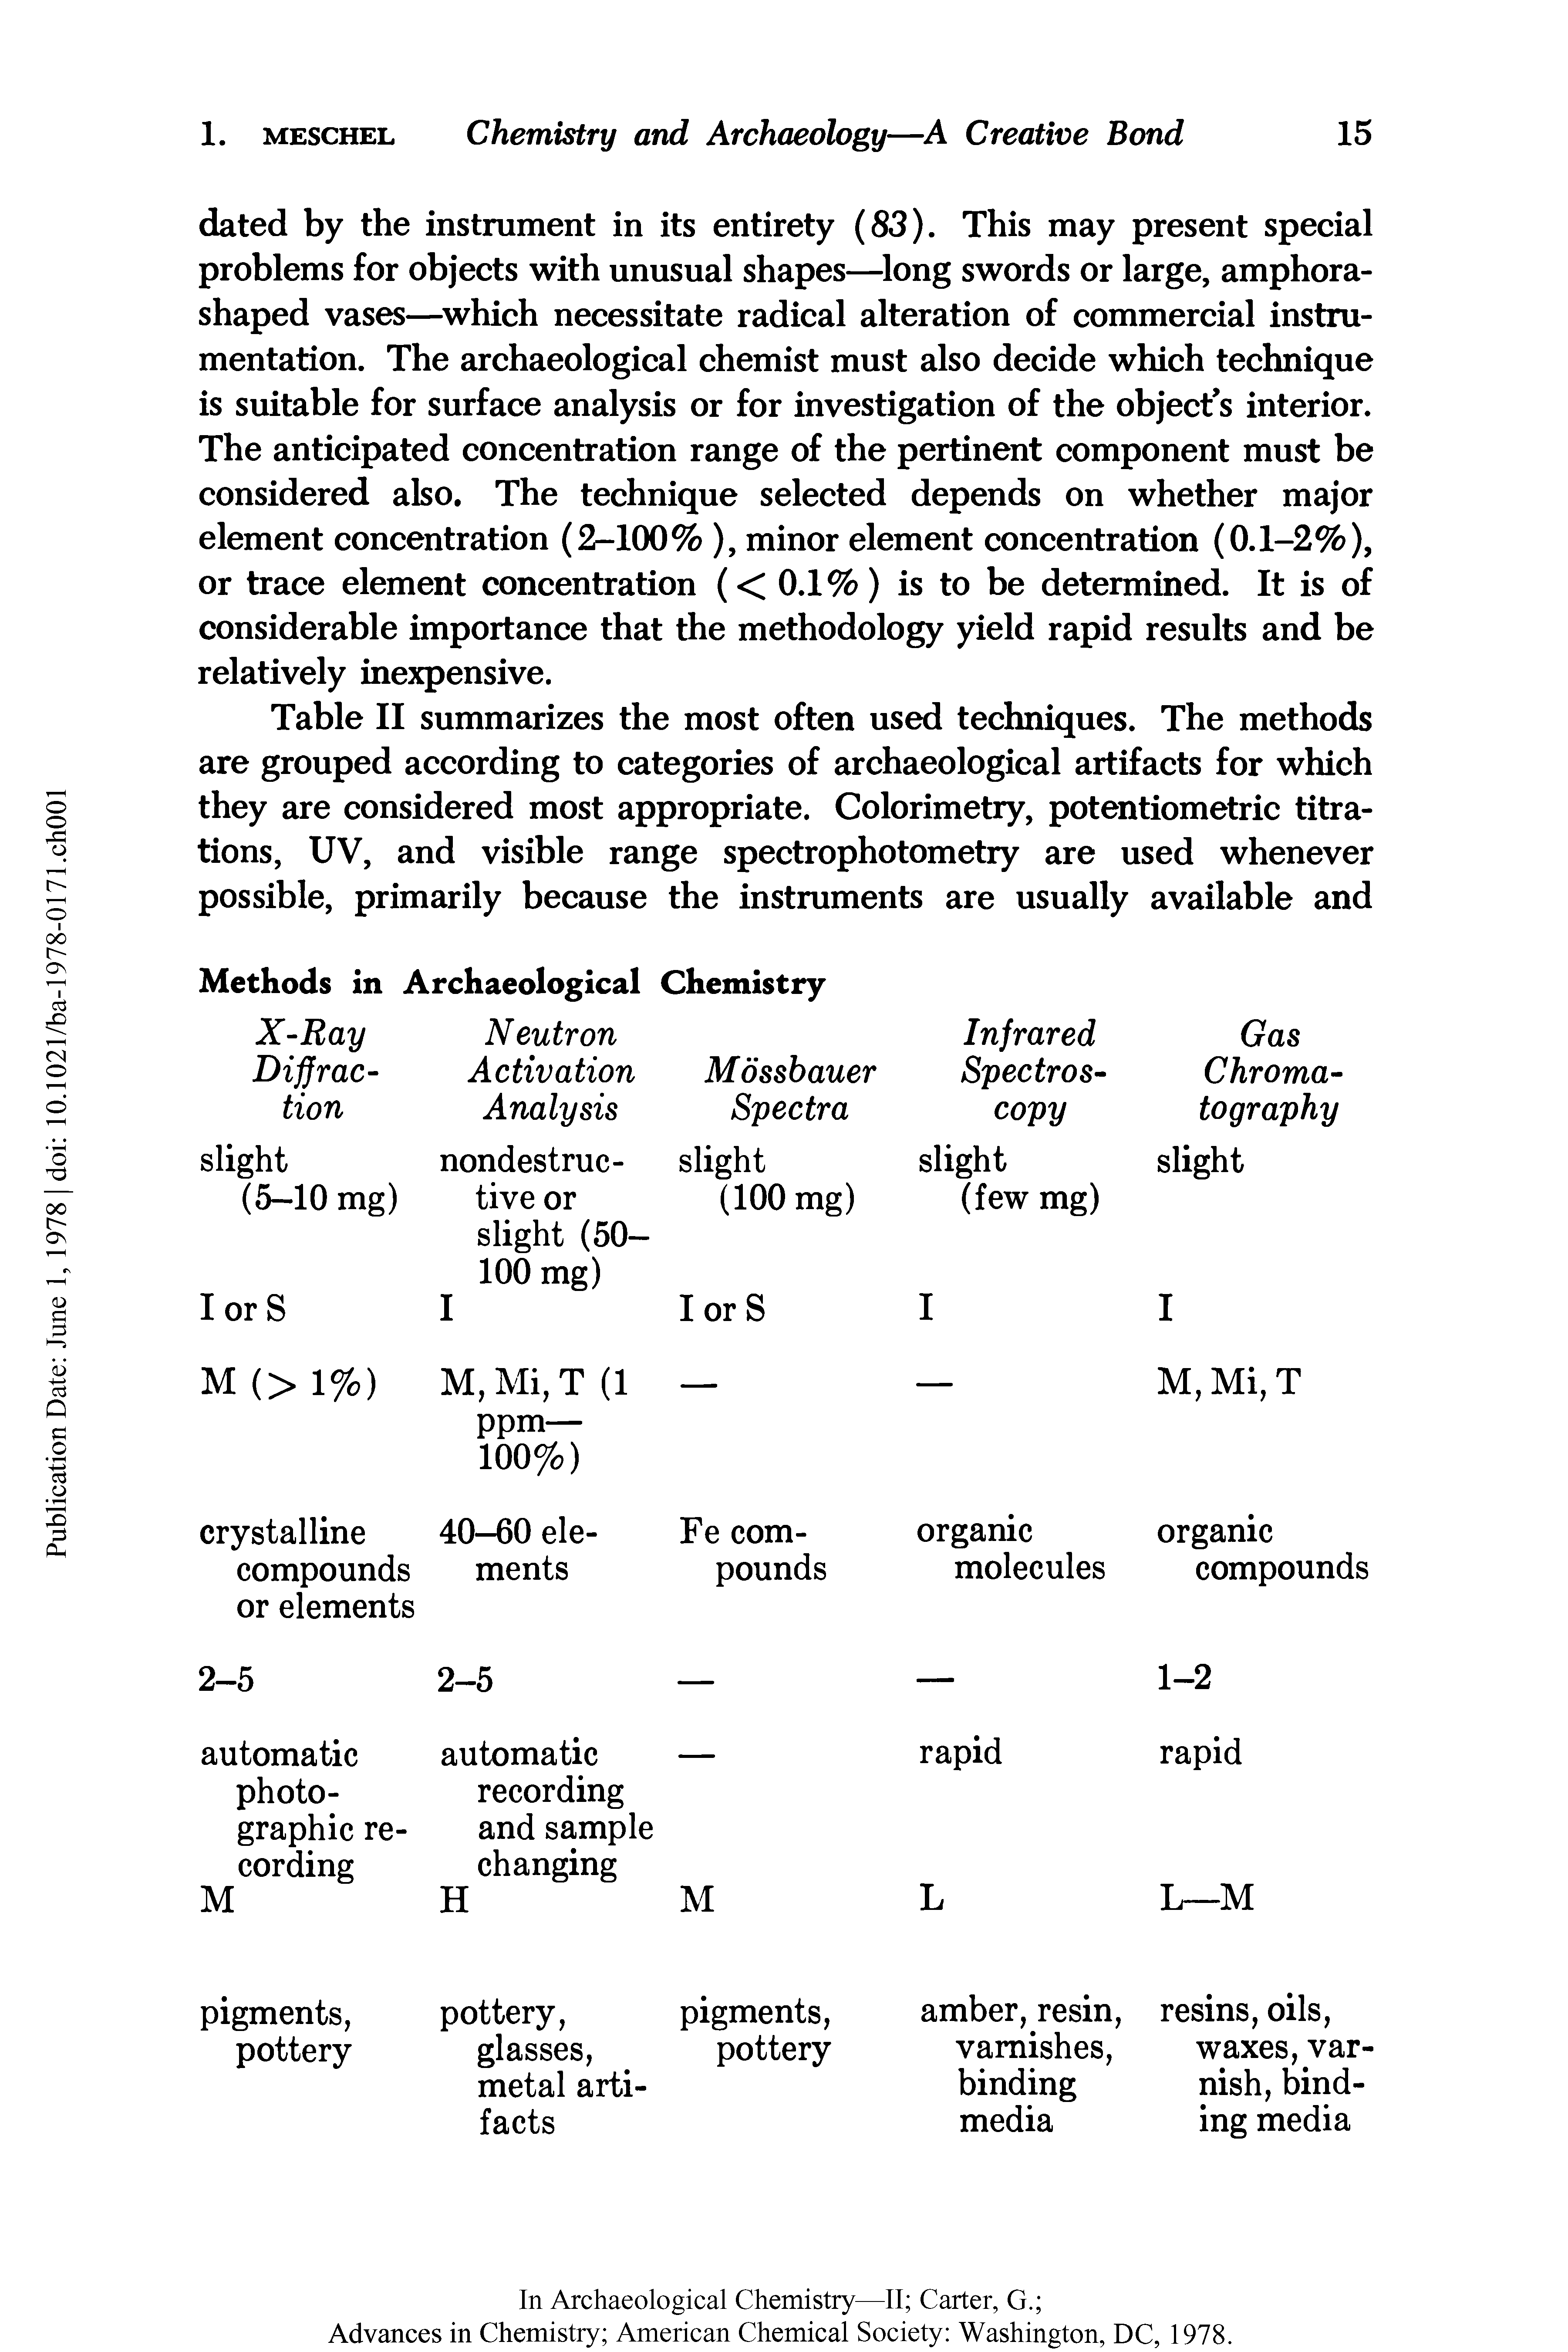 Table II summarizes the most often used techniques. The methods are grouped according to categories of archaeological artifacts for which they are considered most appropriate. Colorimetry, potentiometric titrations, UV, and visible range spectrophotometry are used whenever possible, primarily because the instruments are usually available and...